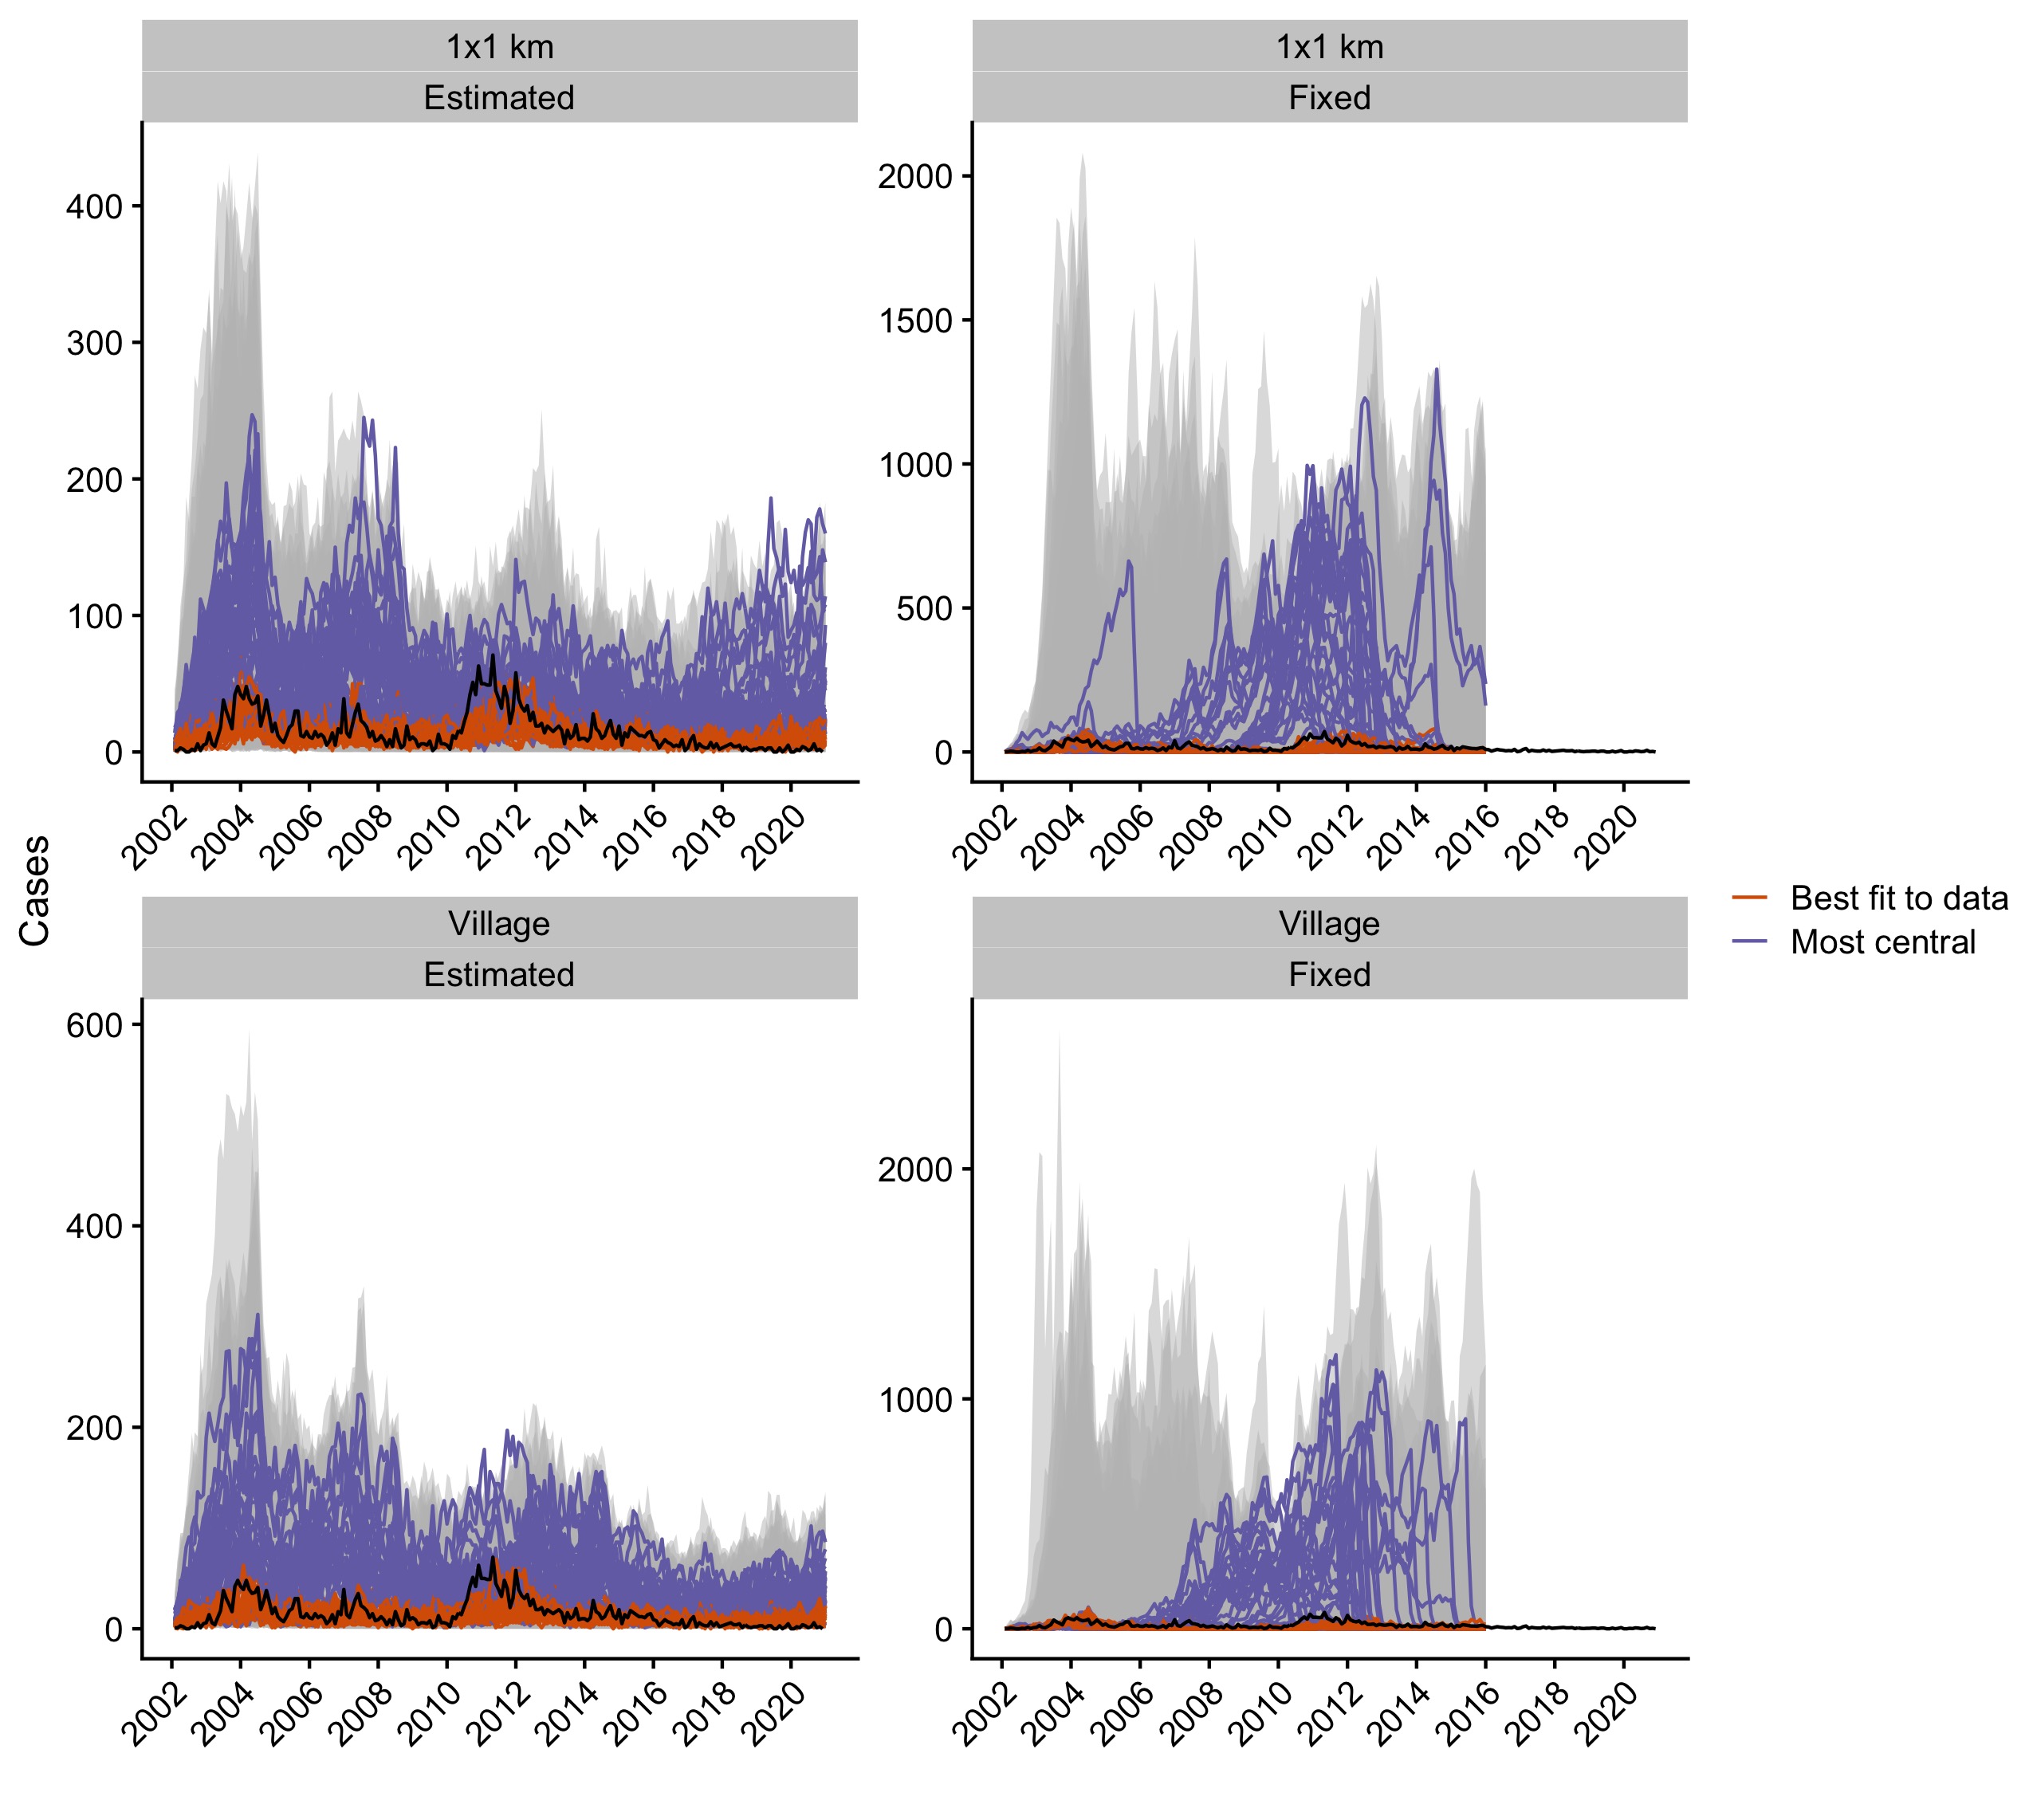 Simulations from the independent posterior estimates for all the models. The grey envelope shows the range of simulations, and the black line is the time series of observed monthly cases. The orange lines show the top five simulations that best fit the data (lowest RMSE) and the purple lines show the top five simulations that have the highest centrality score.